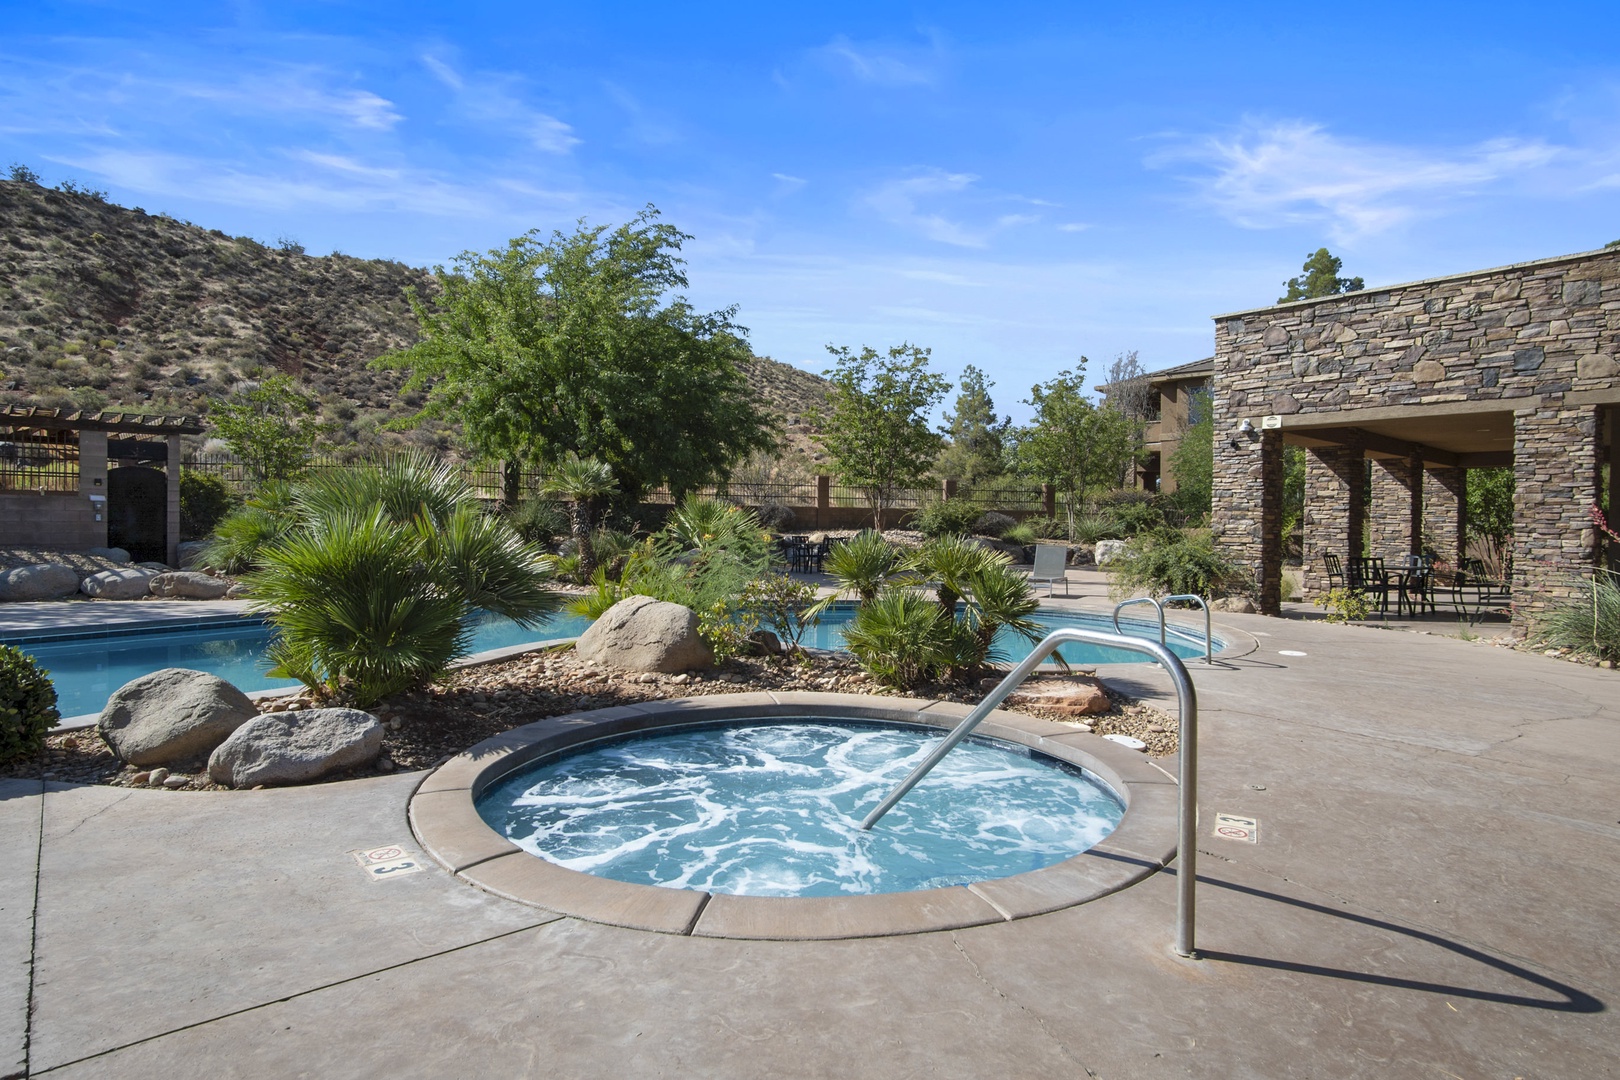 Outdoor communal pool and hot tub